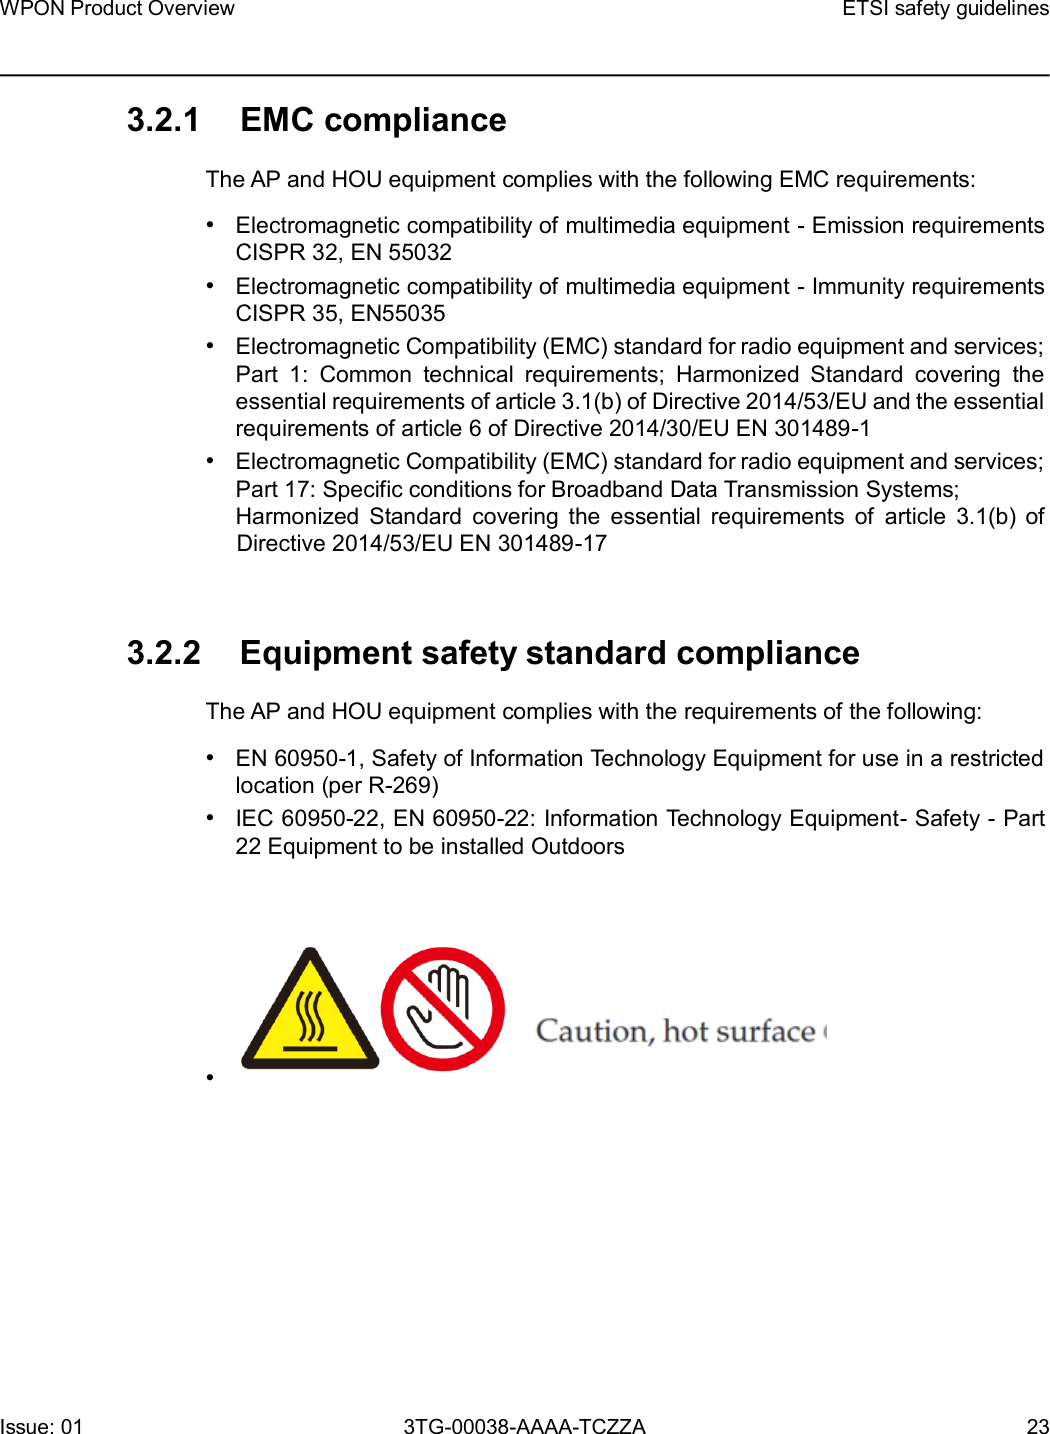 Page 23 of Nokia Bell 7577WPONAPED WPON User Manual WPON Product Overview